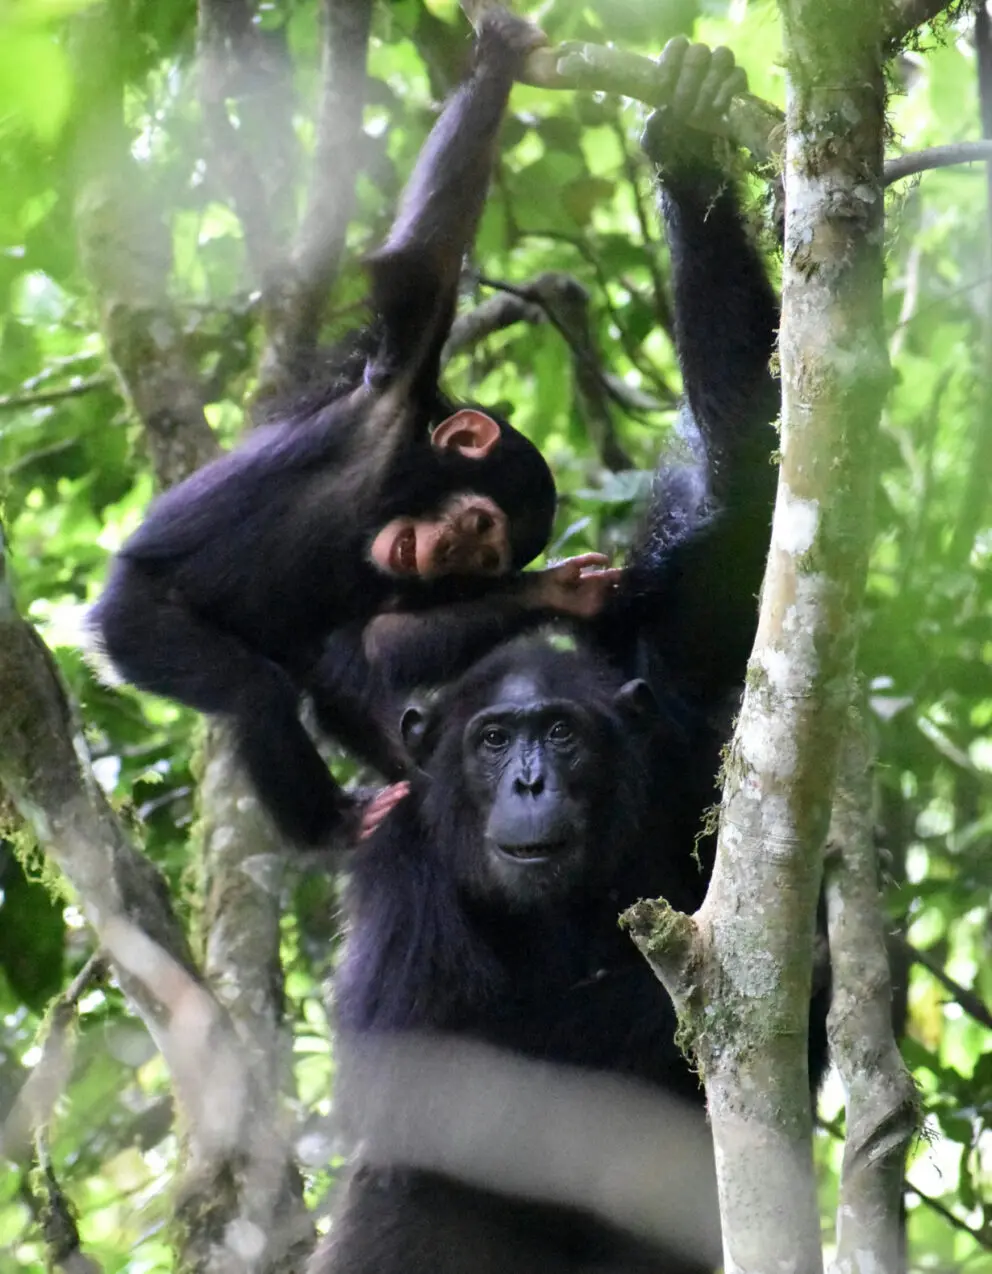 LA Post: Playing with the kids is important work for chimpanzee mothers